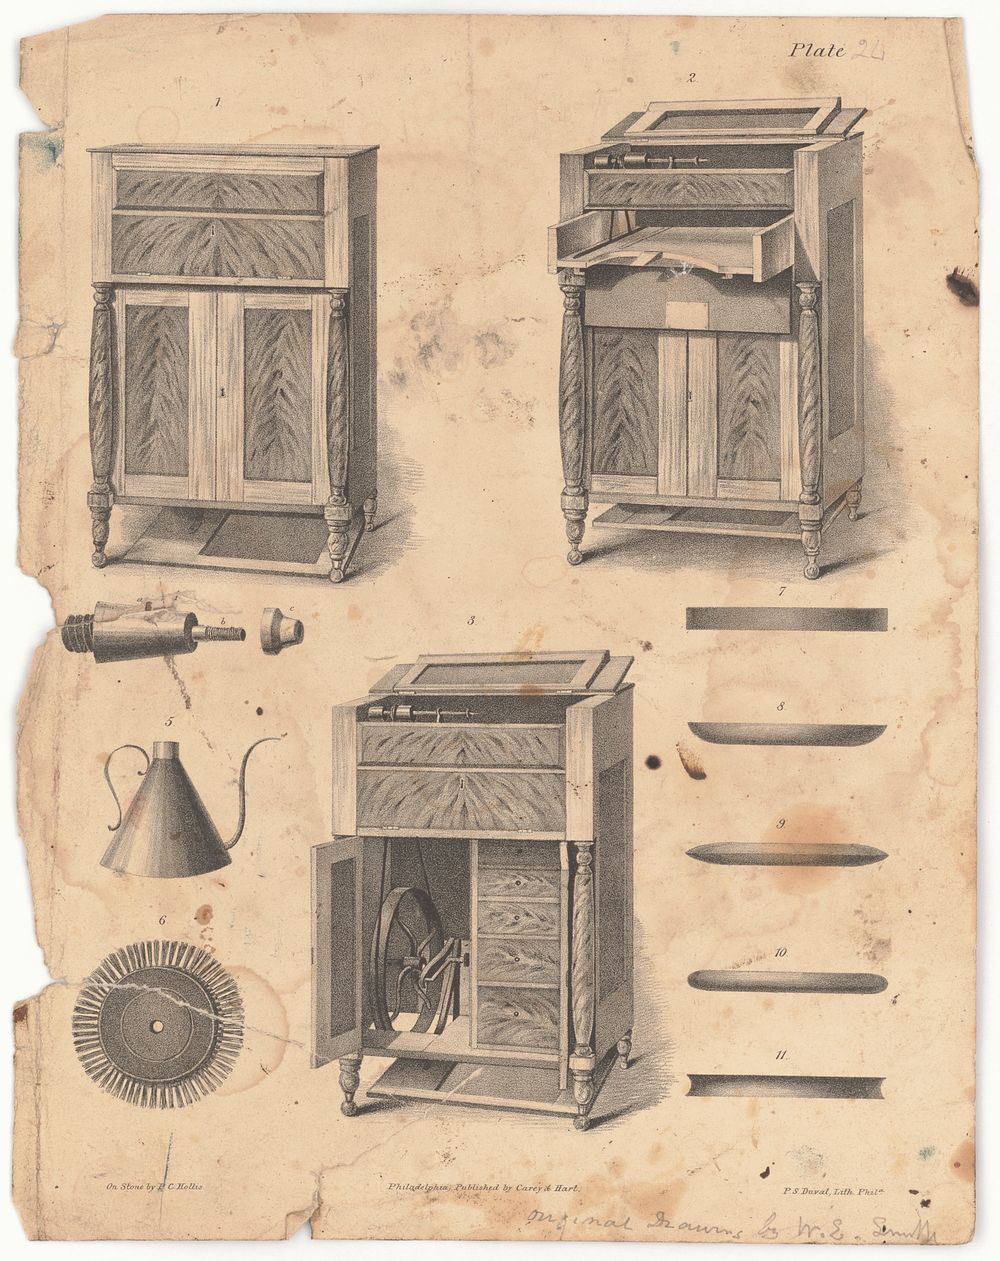 [Cabinet lathe, grinding apparatus and work bench] / P.S. Duval, Lith. Phila. ; on stone by P.C. Hollis., Duval, Peter S.…